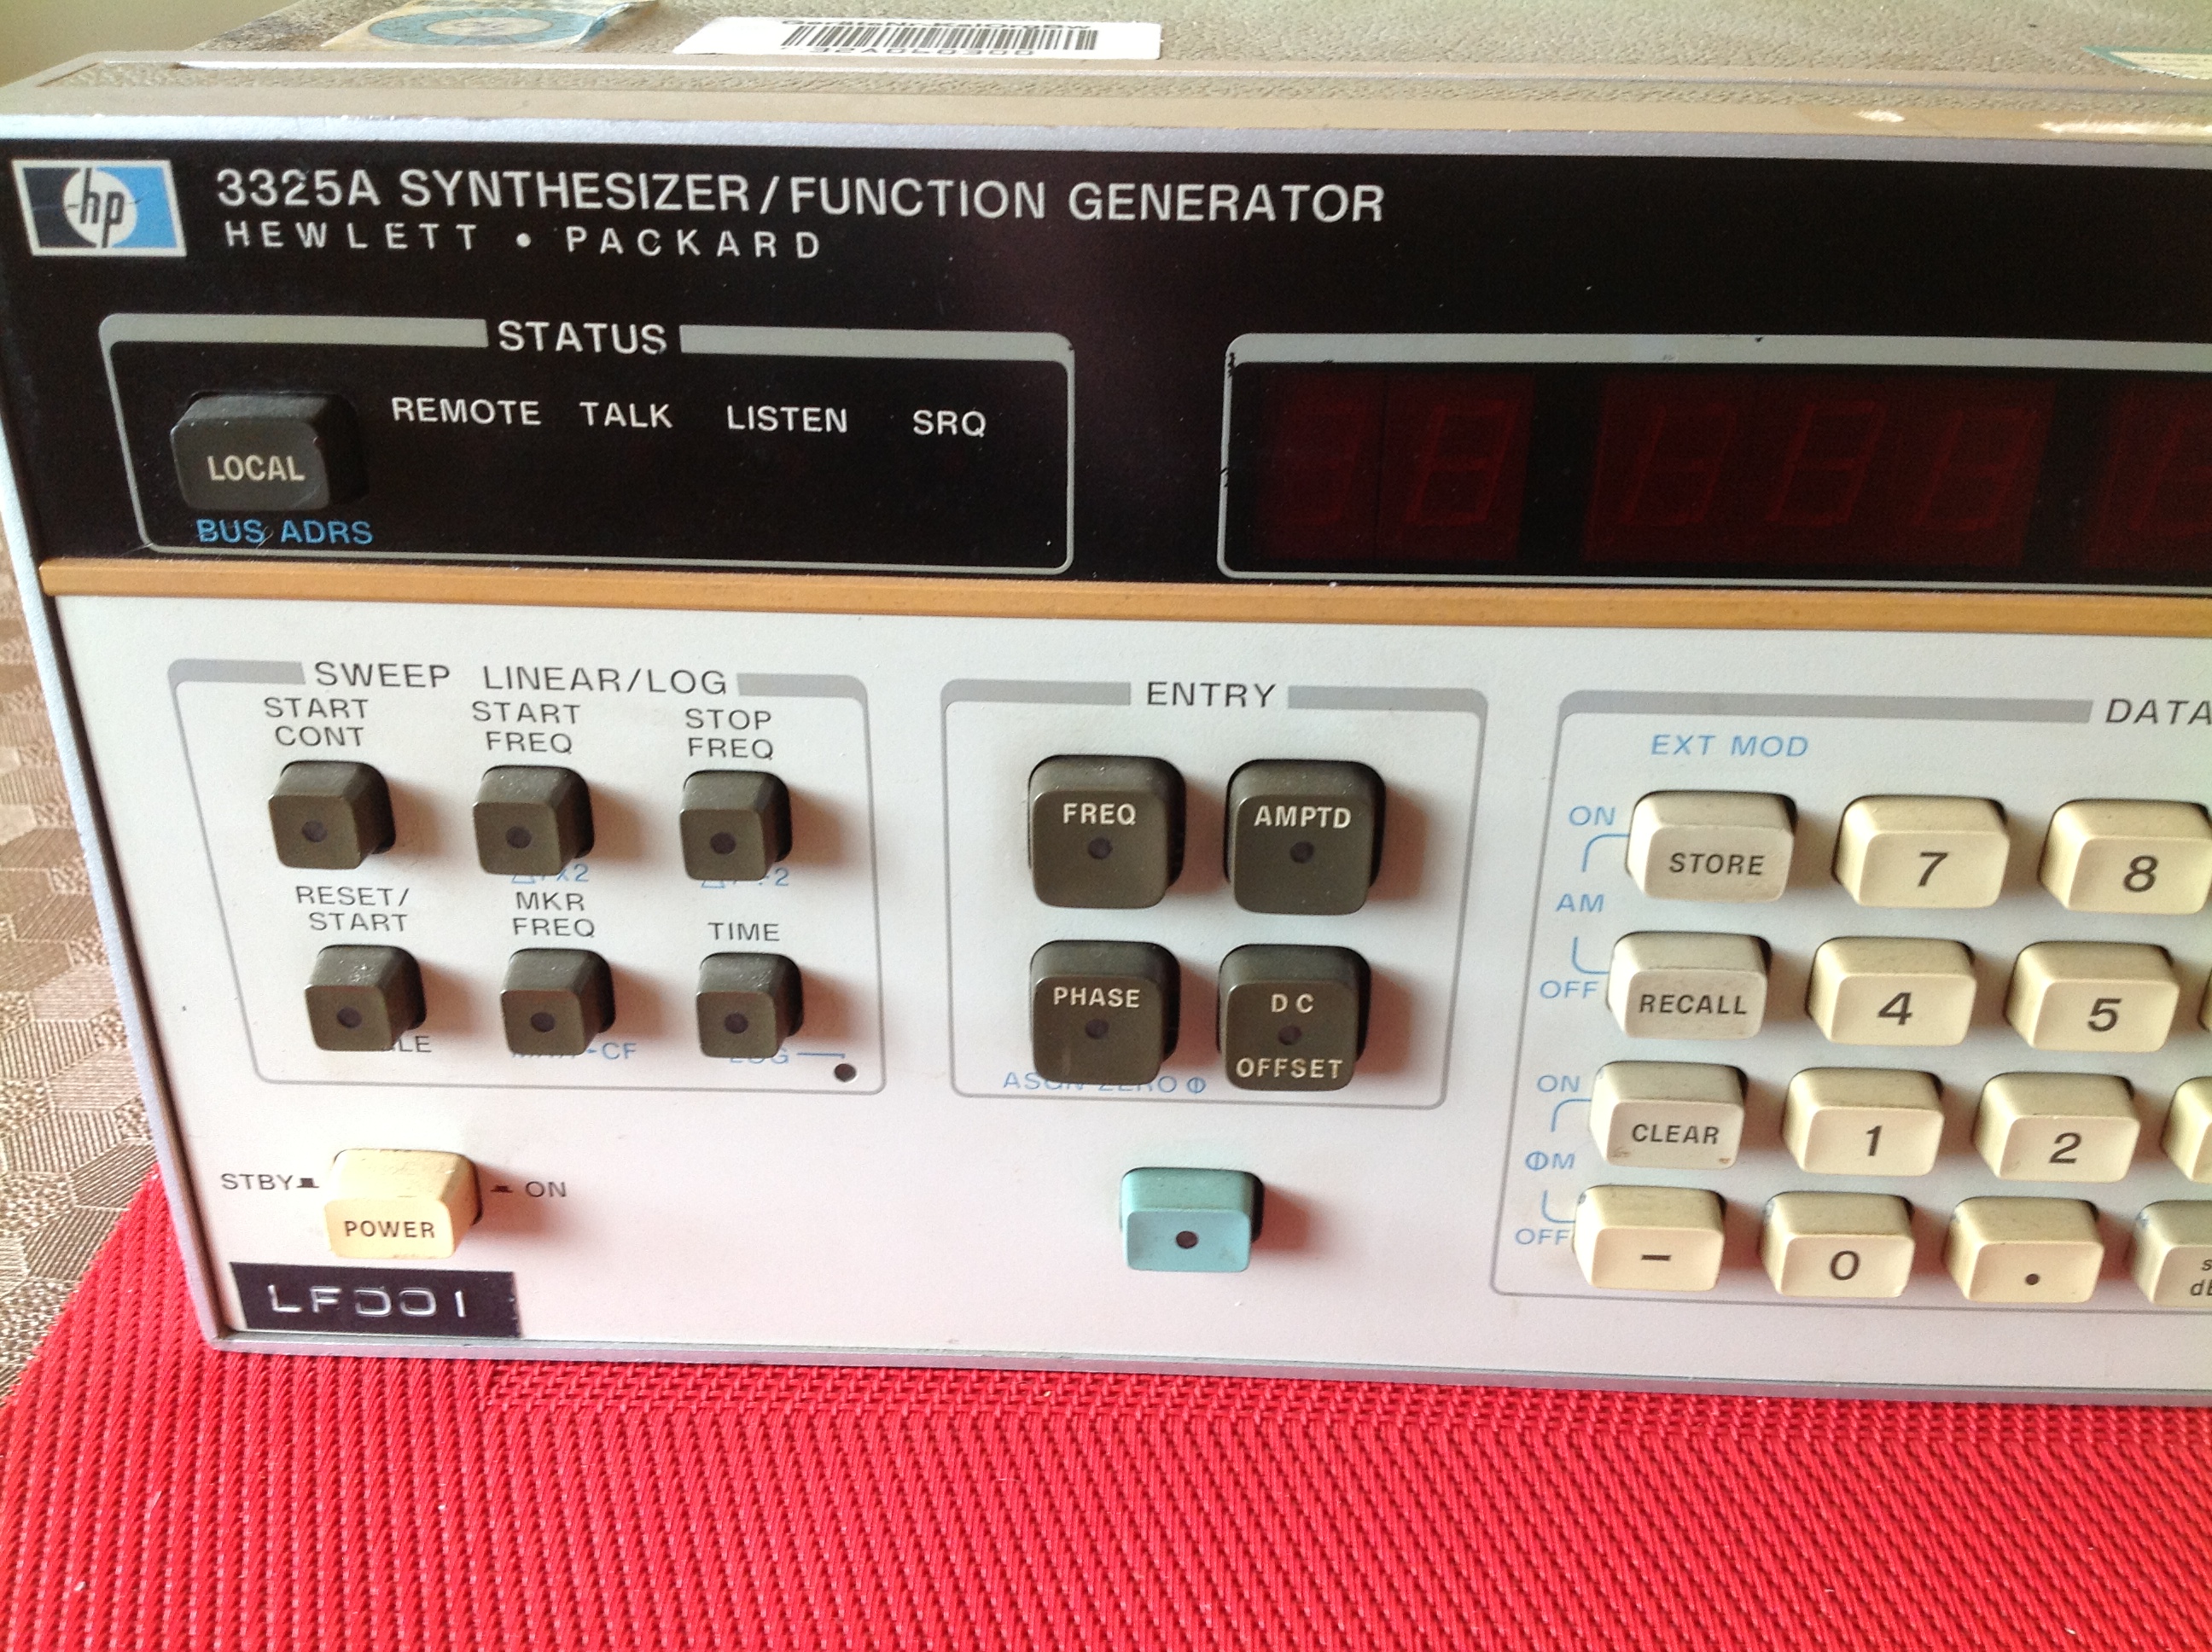 Hewlett Packard 3325A Synthesizer/Functions Generator